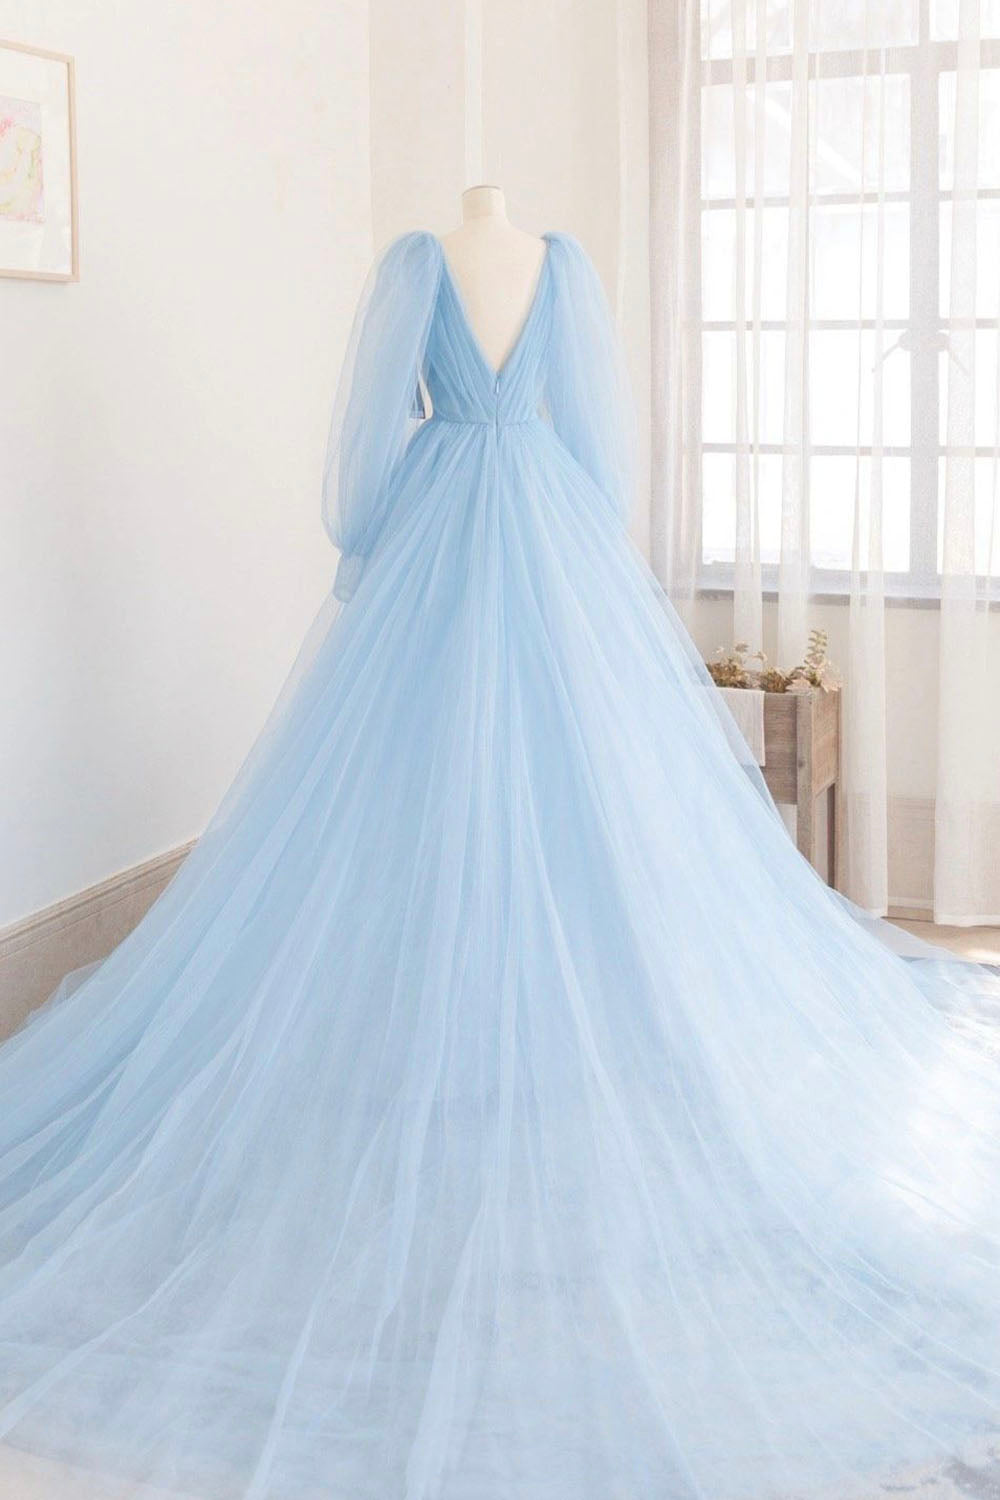 Prom Look, Blue V-Neck Tulle Long Prom Dress, Long Sleeve A-Line Evening Party Dress